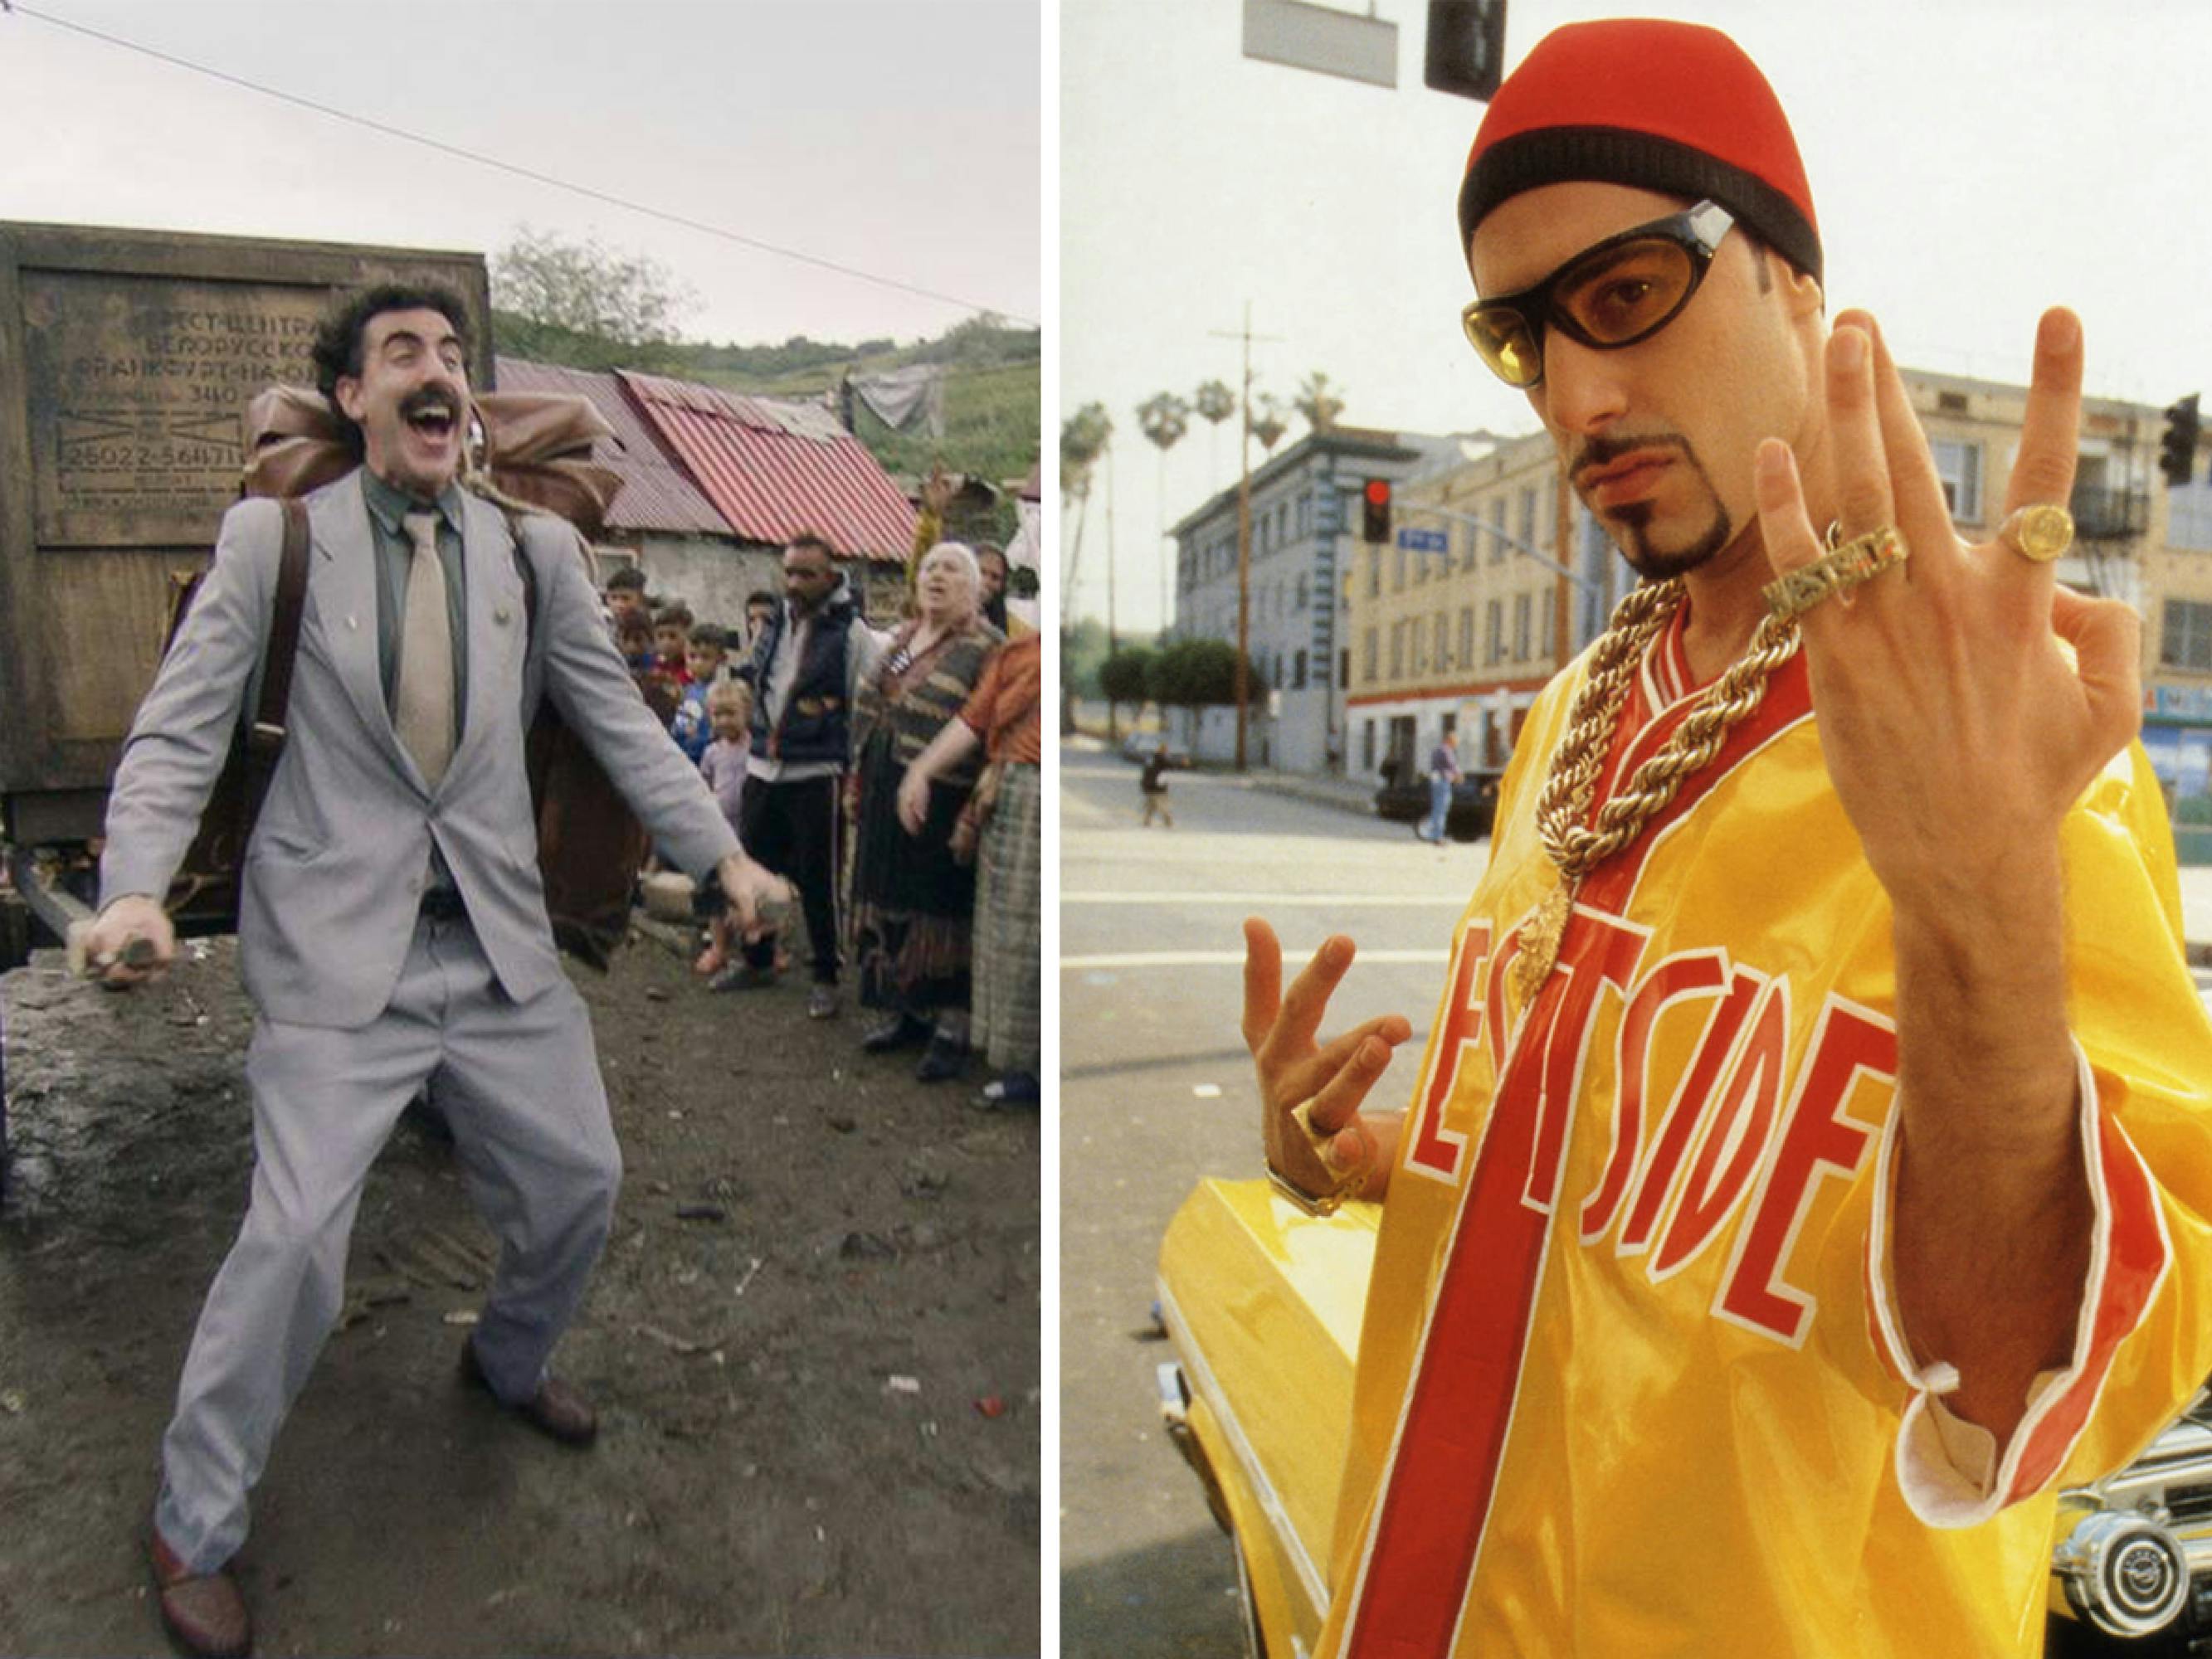 Sacha Baron Cohen stepping back into character for 'Ali G: Rezurection' -  The Verge